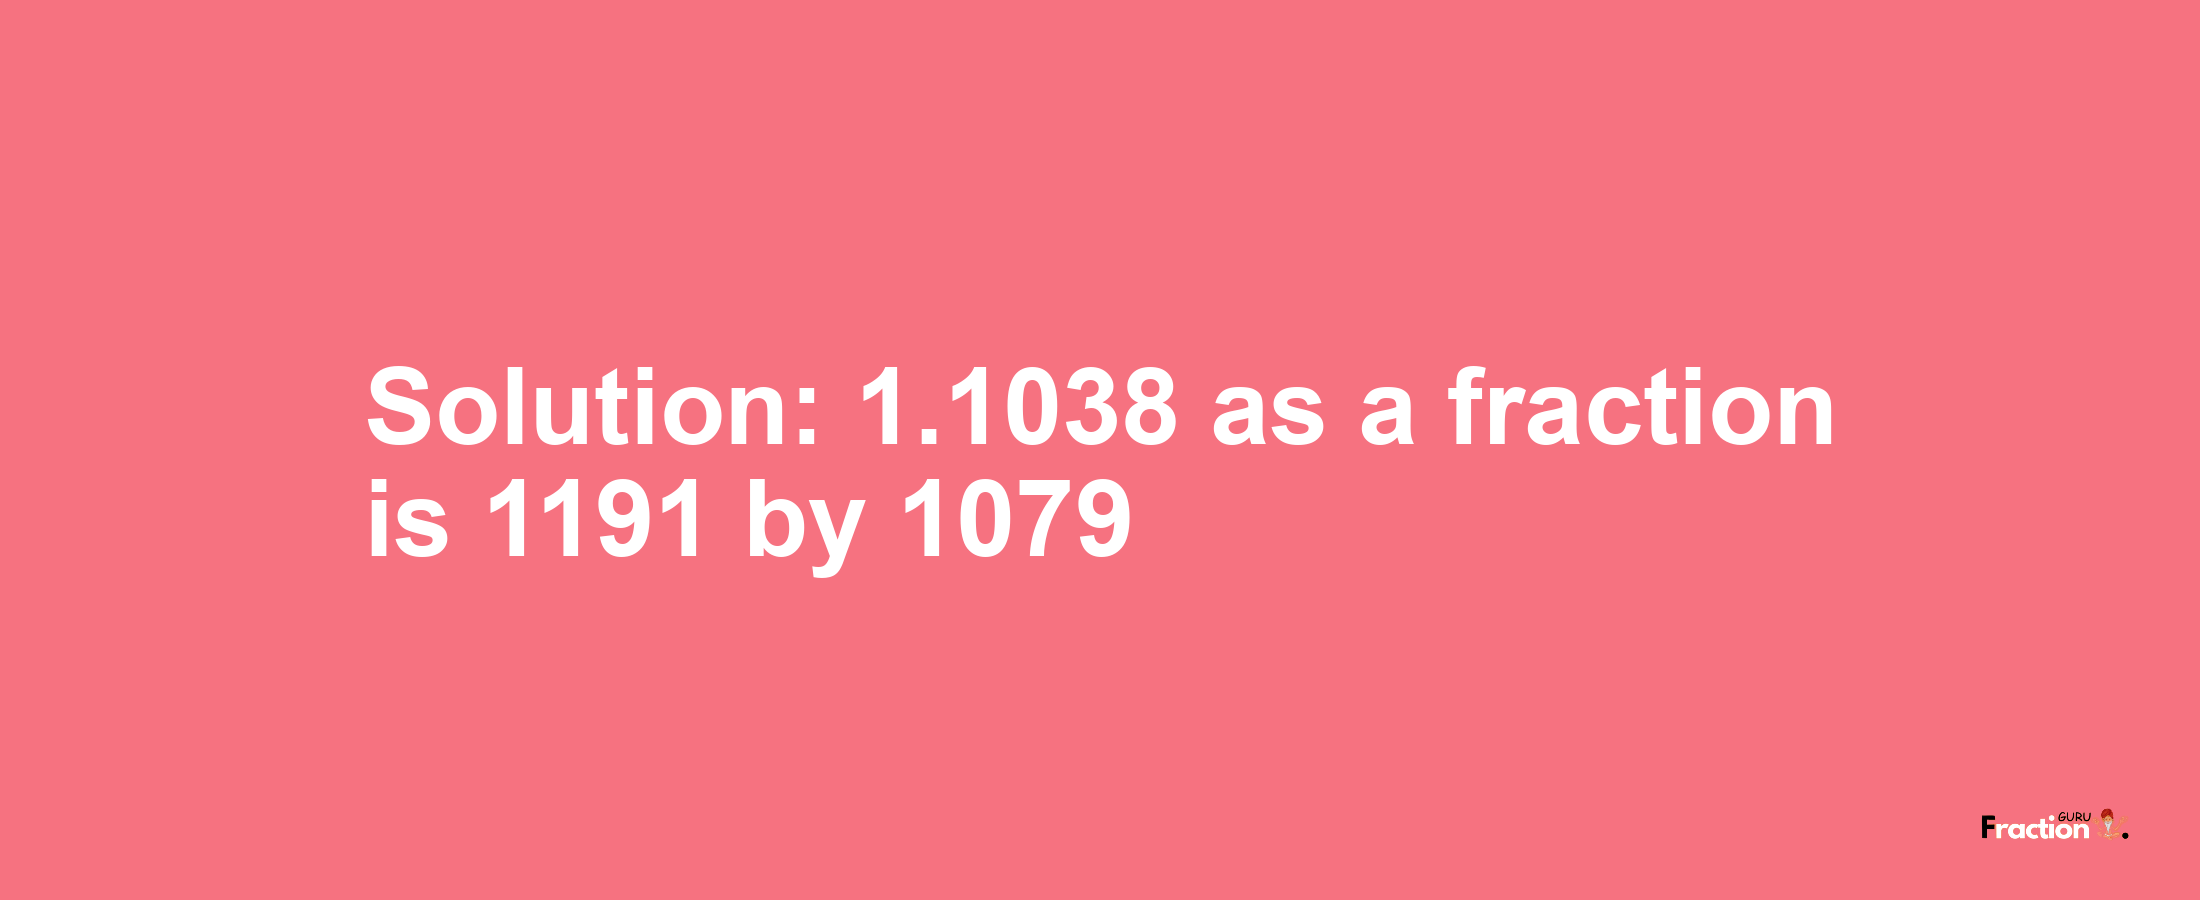 Solution:1.1038 as a fraction is 1191/1079